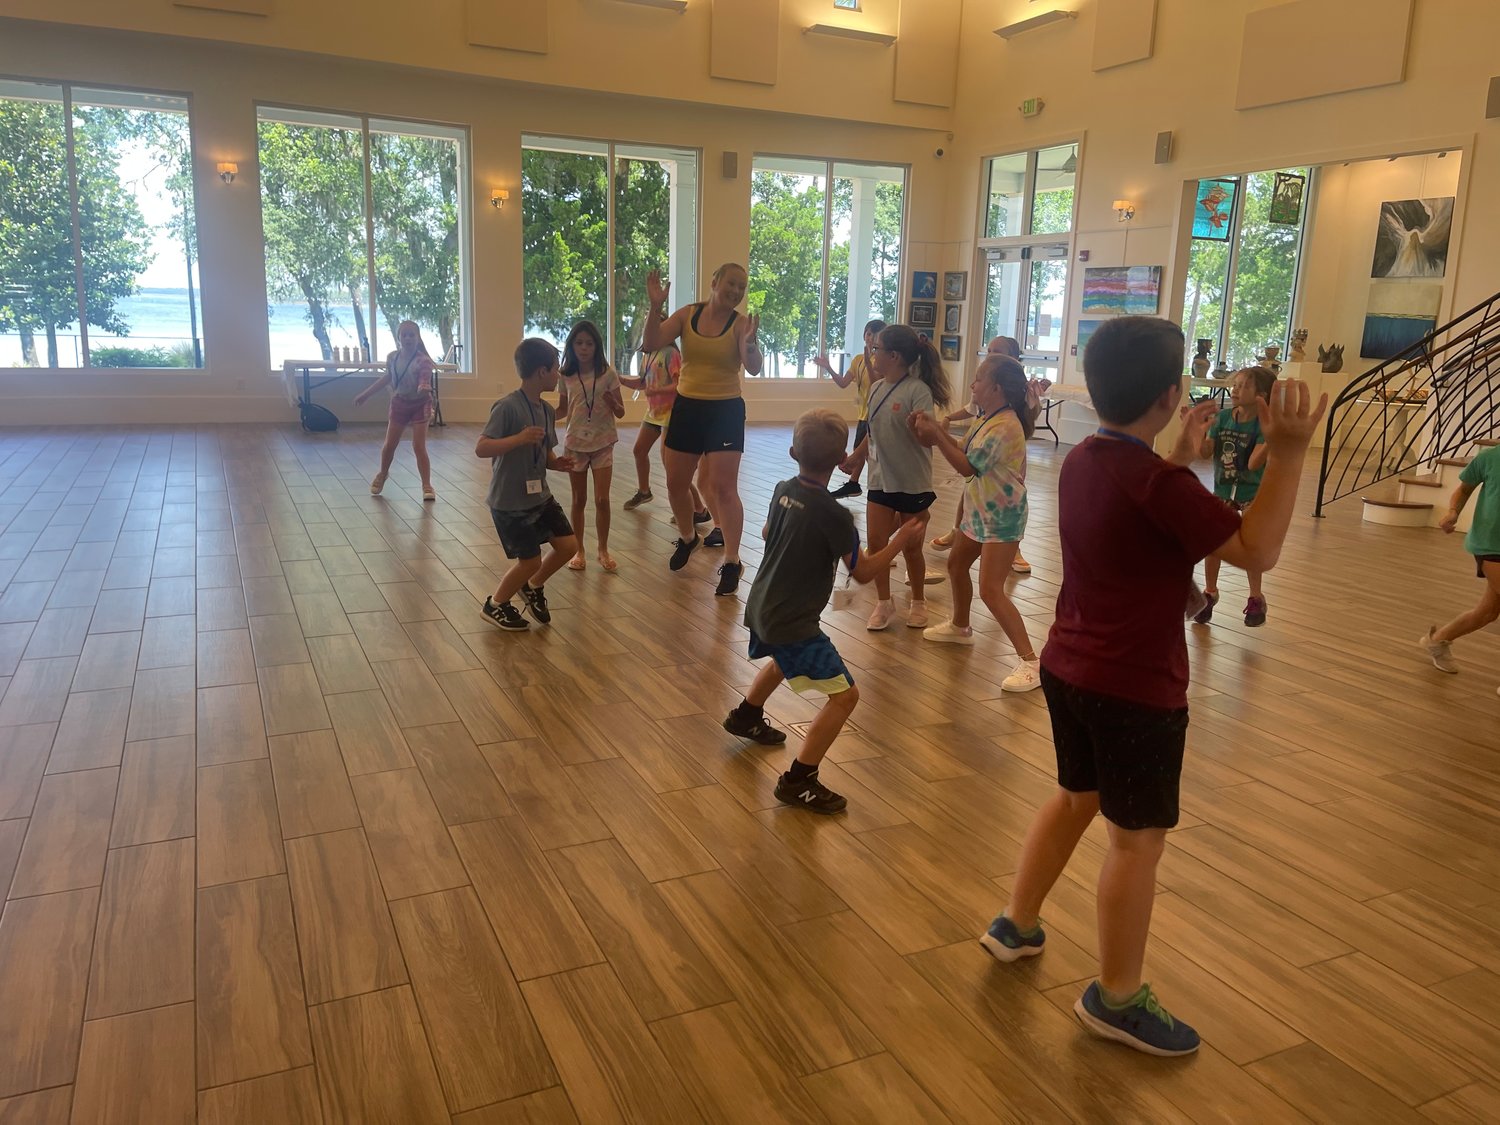 Choreographer Jaleesa Poindexter taught the campers all the steps to the surprise flash mob dance put on at the end of the week.